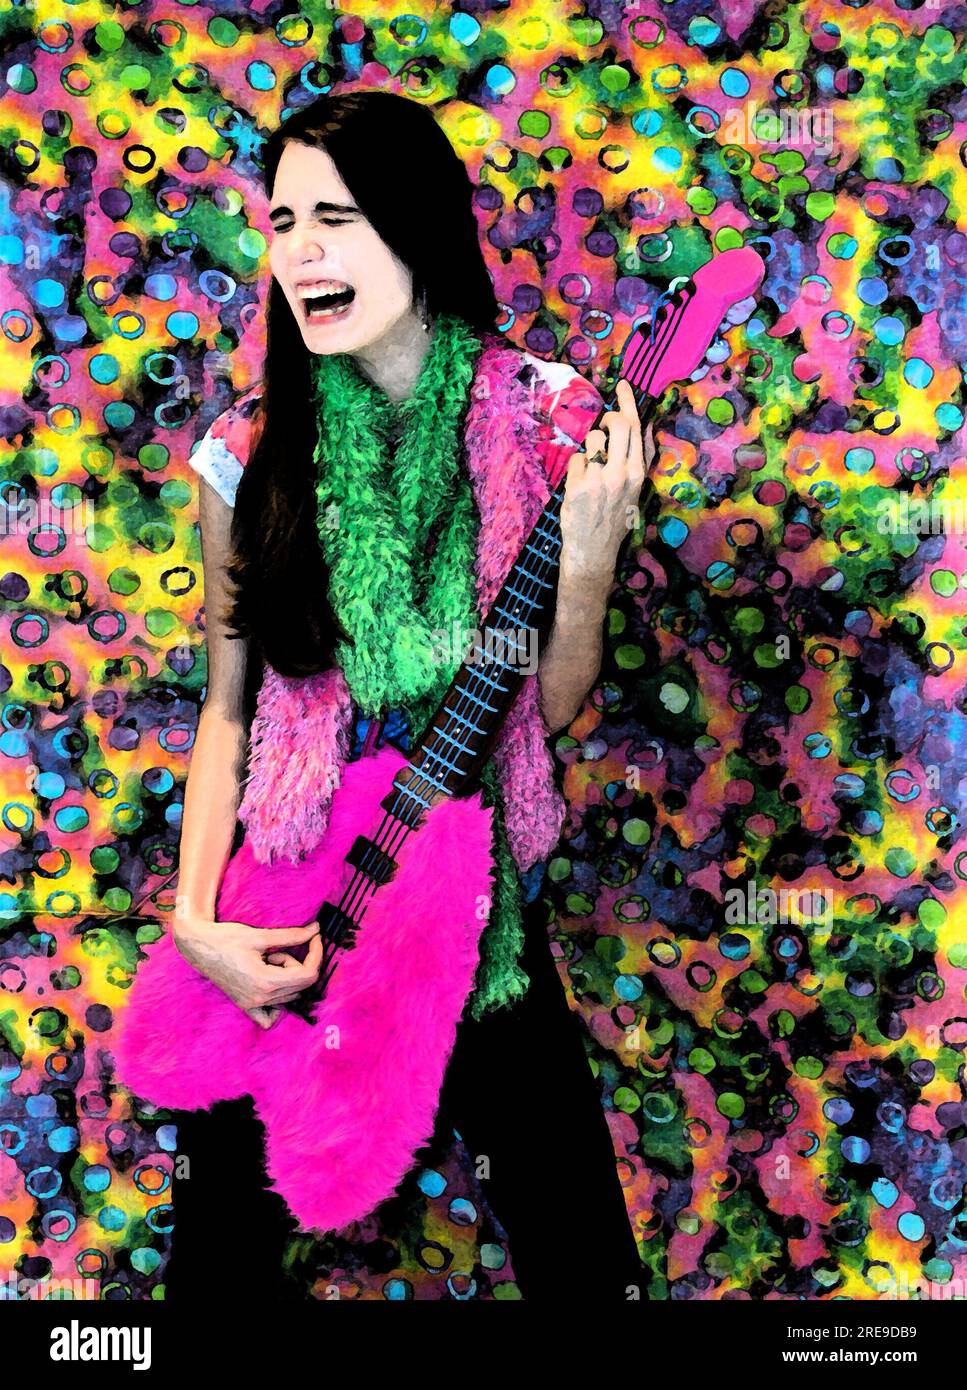 Graphic image of teen laughing hillariously, while pretending to strum on a stuffed, fuzzy, base guitar.  A tye-dye background adds vibrant color and Stock Photo